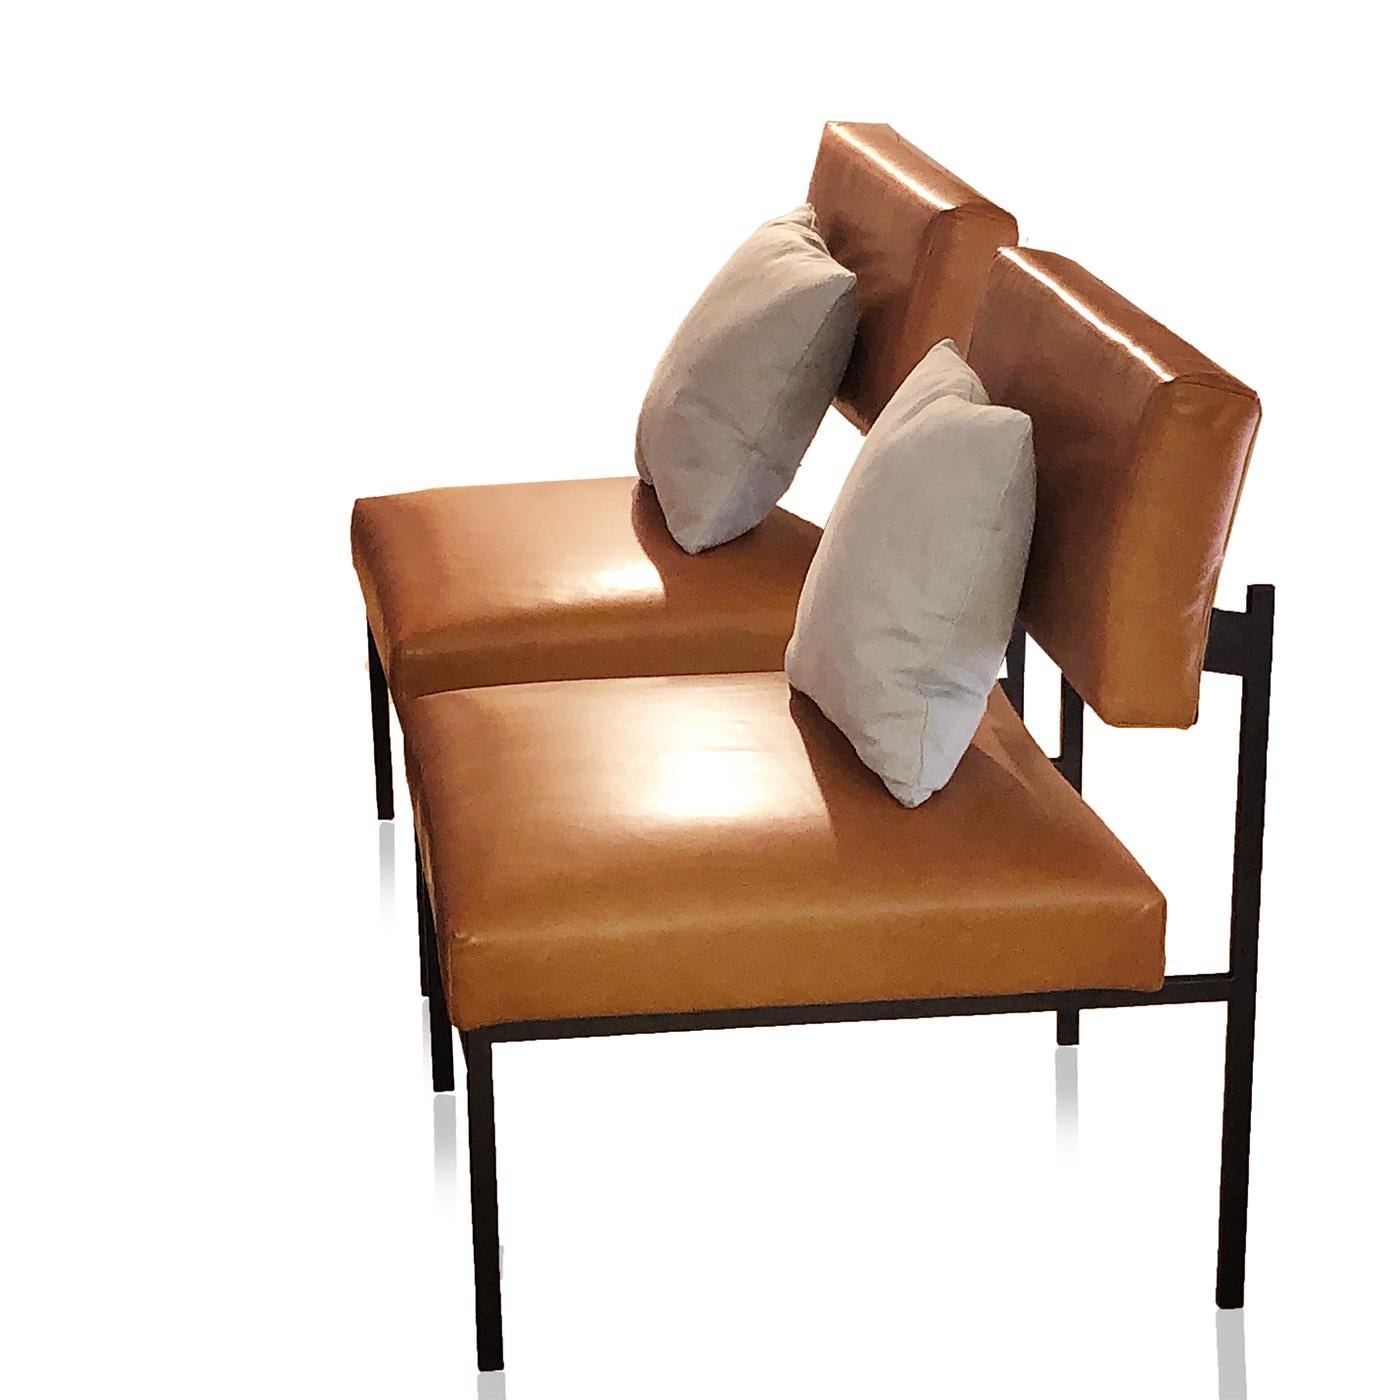 With its 50s retro appeal, the Aurea Brown Leather Armchair by CtrlZak and Davide Barzaghi is designed with bold lines and an ultra chic appearance. This bestseller to restaurants and hotels is the height of comfort and it’s plush cushioning with